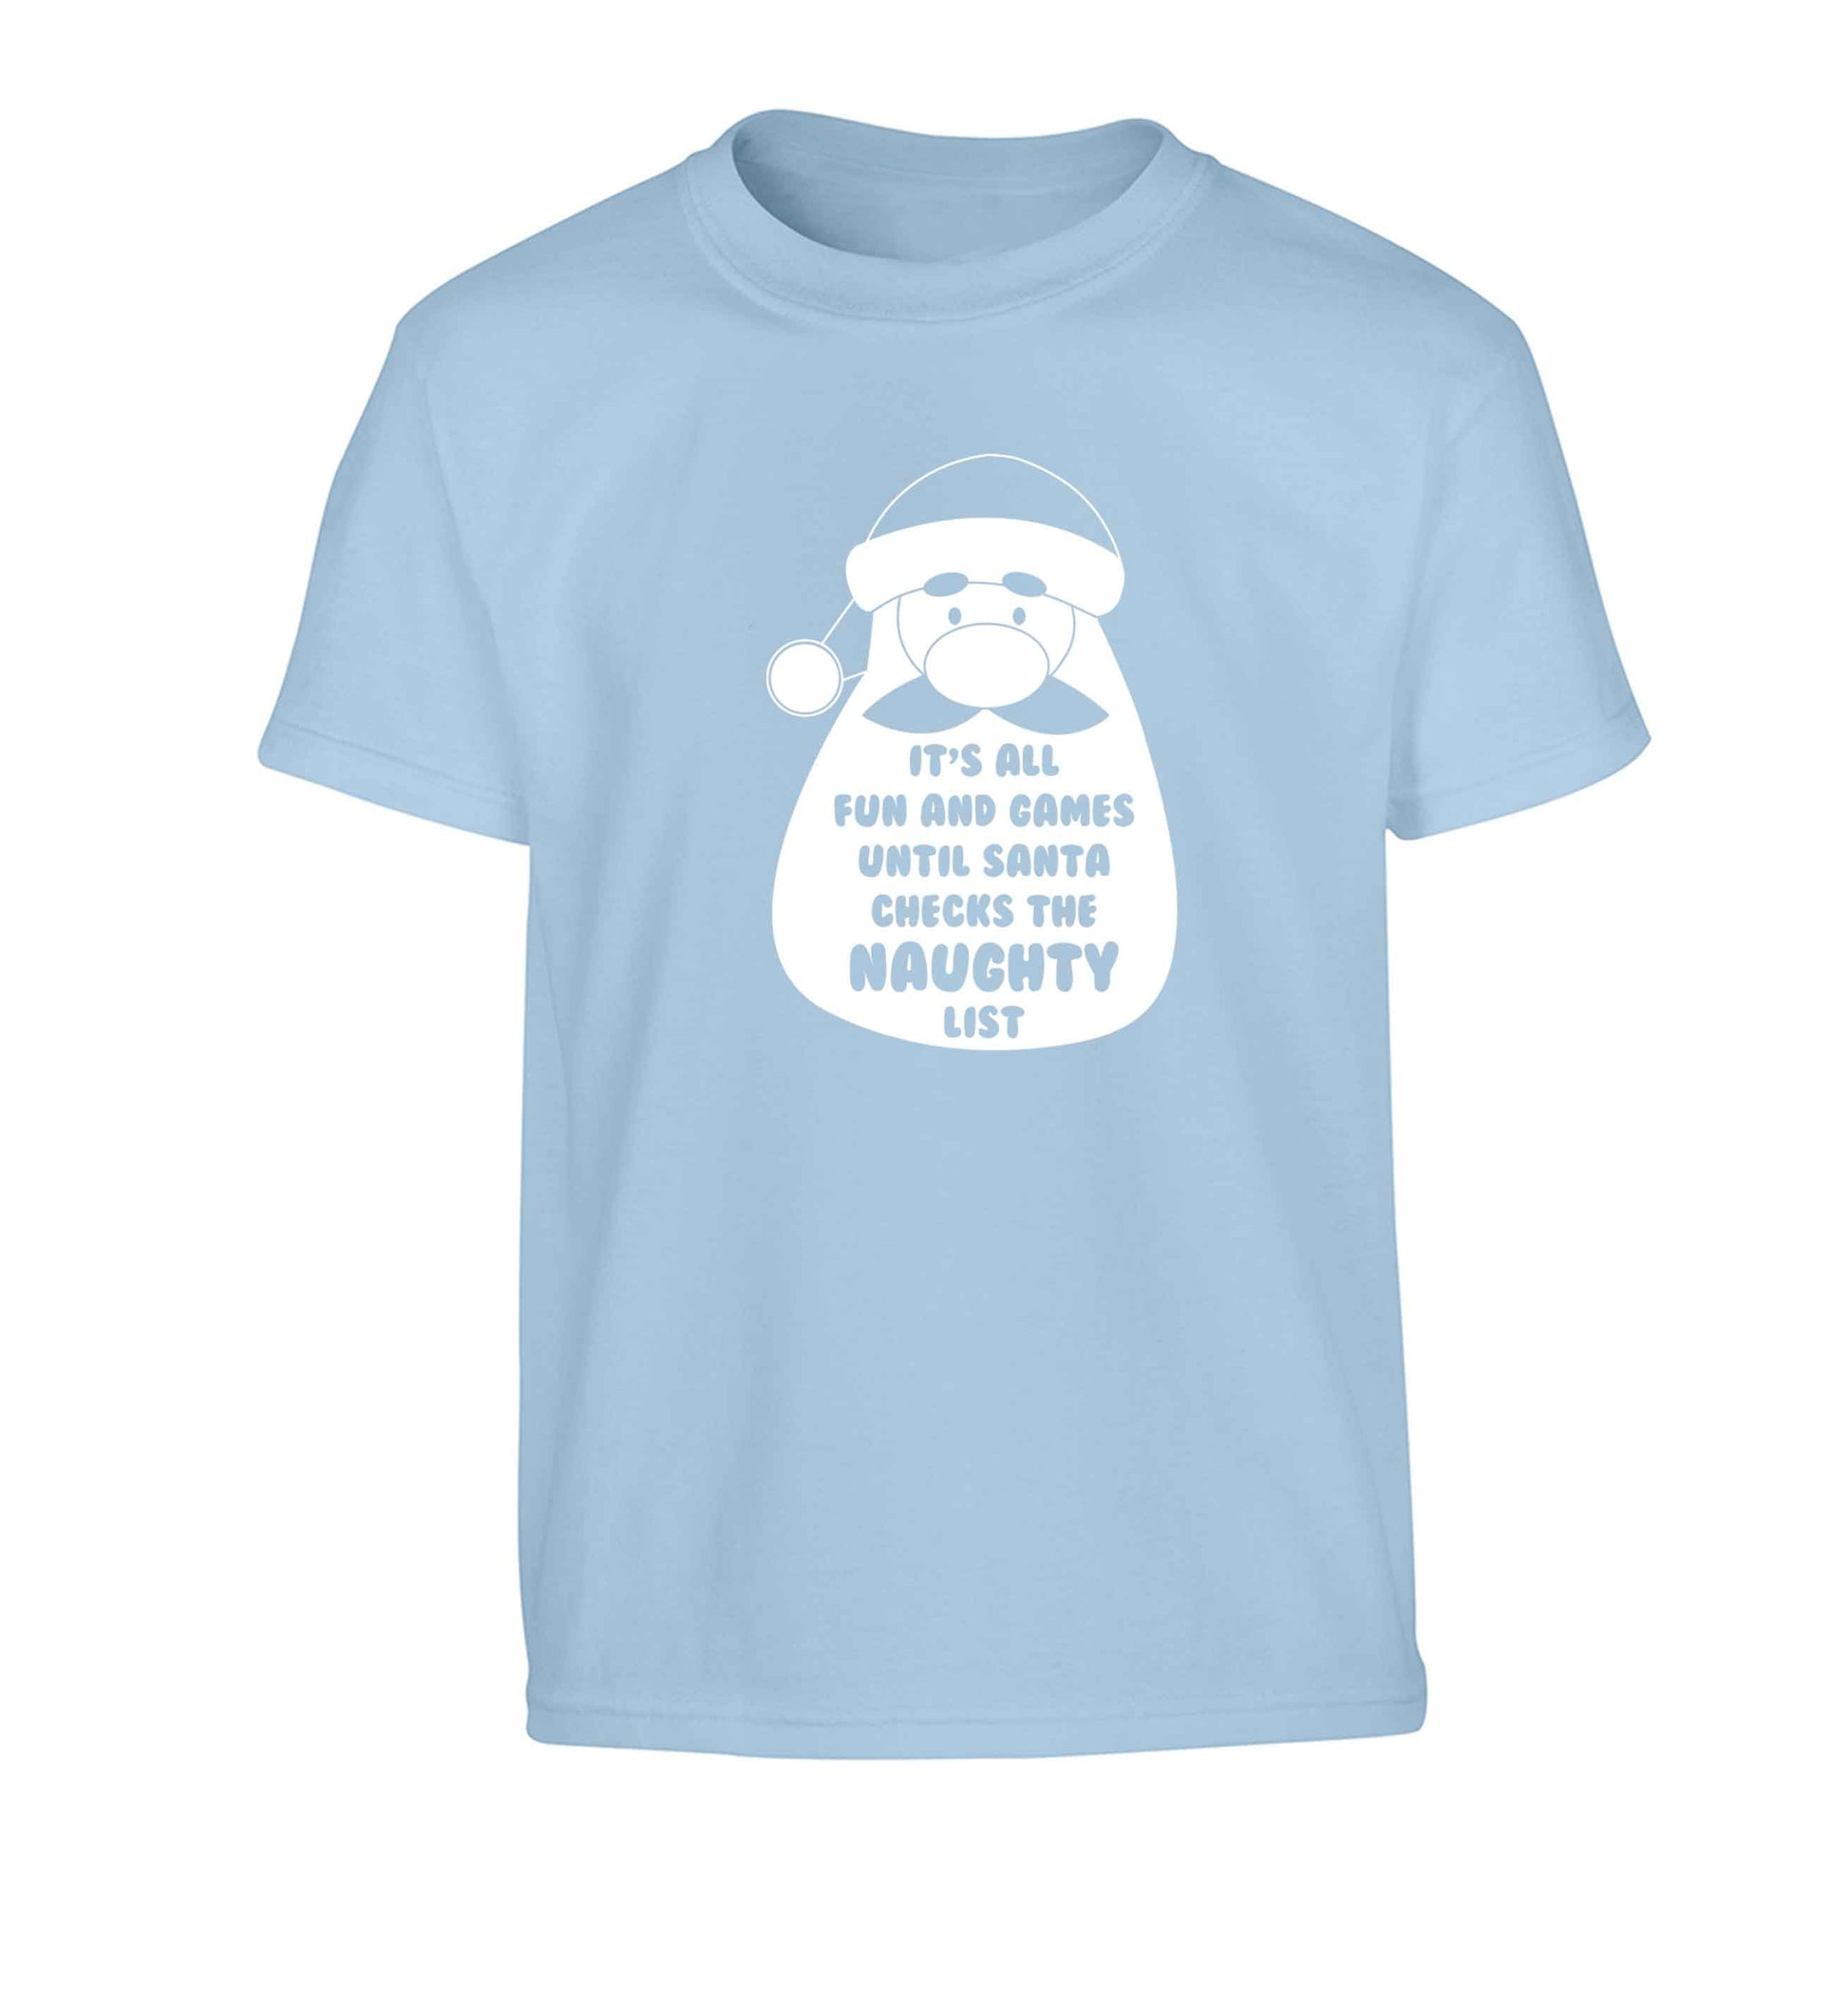 It's all fun and games until Santa checks the naughty list Children's light blue Tshirt 12-13 Years